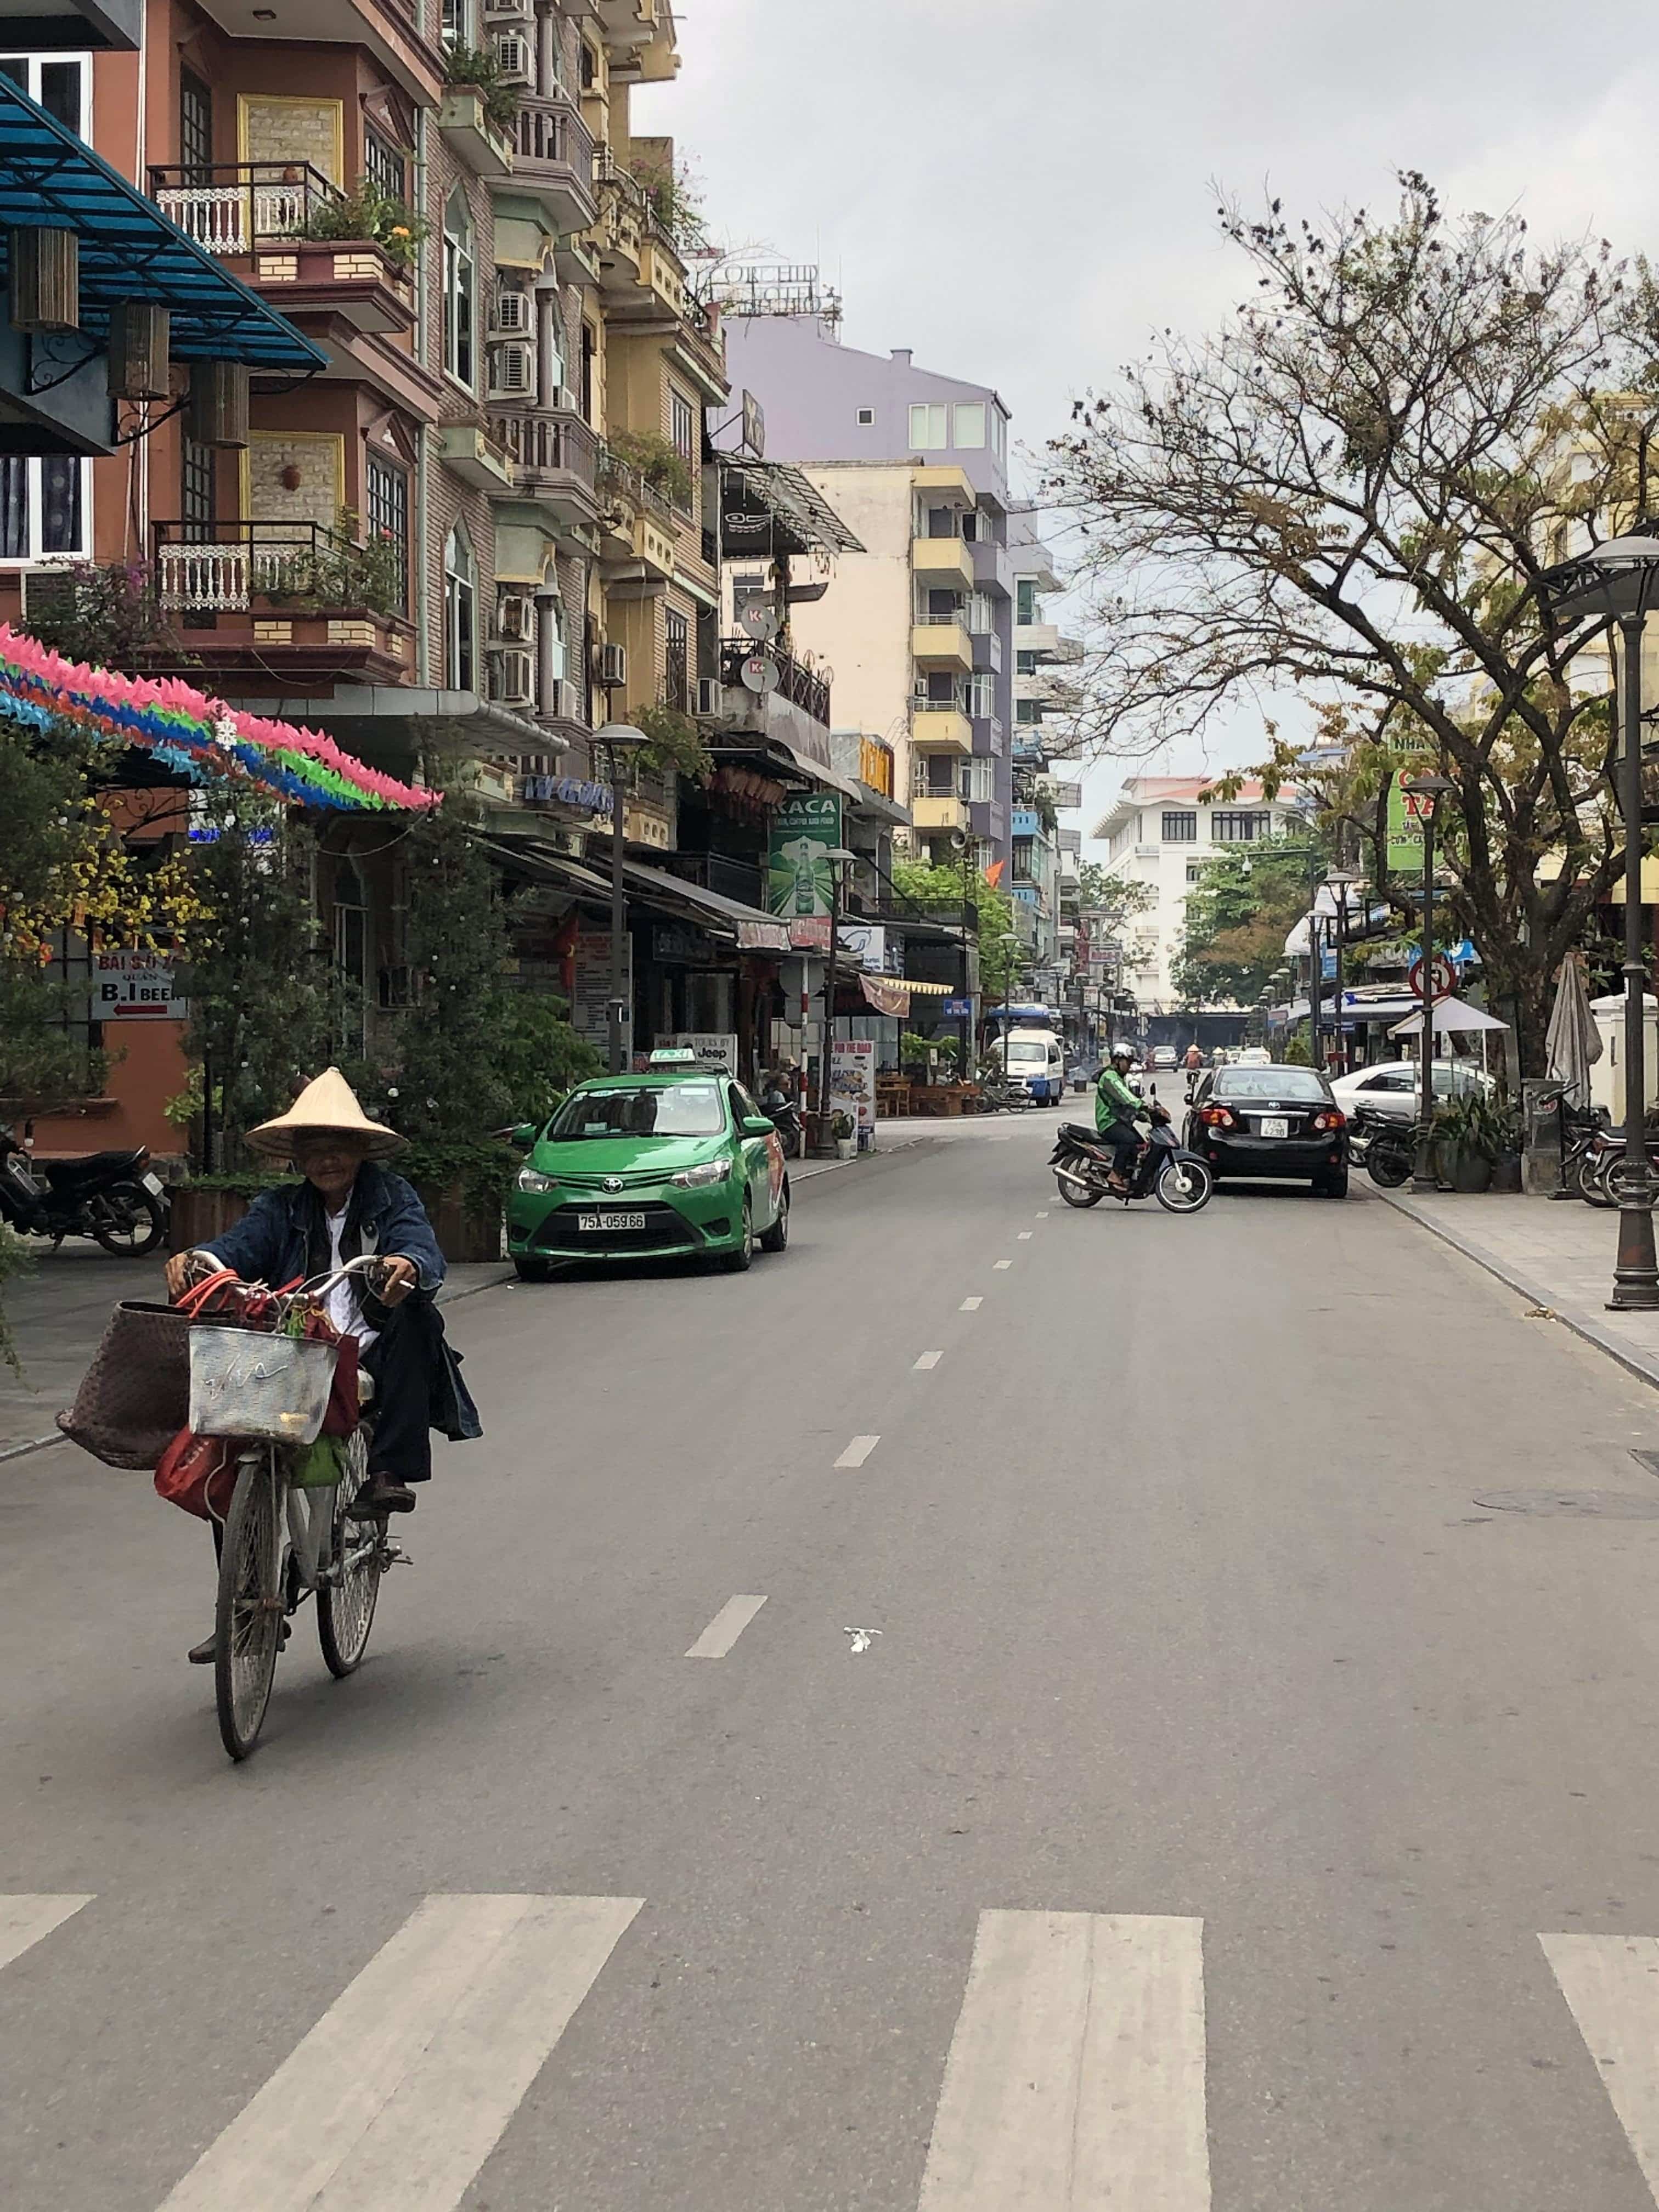 Streets of Hue